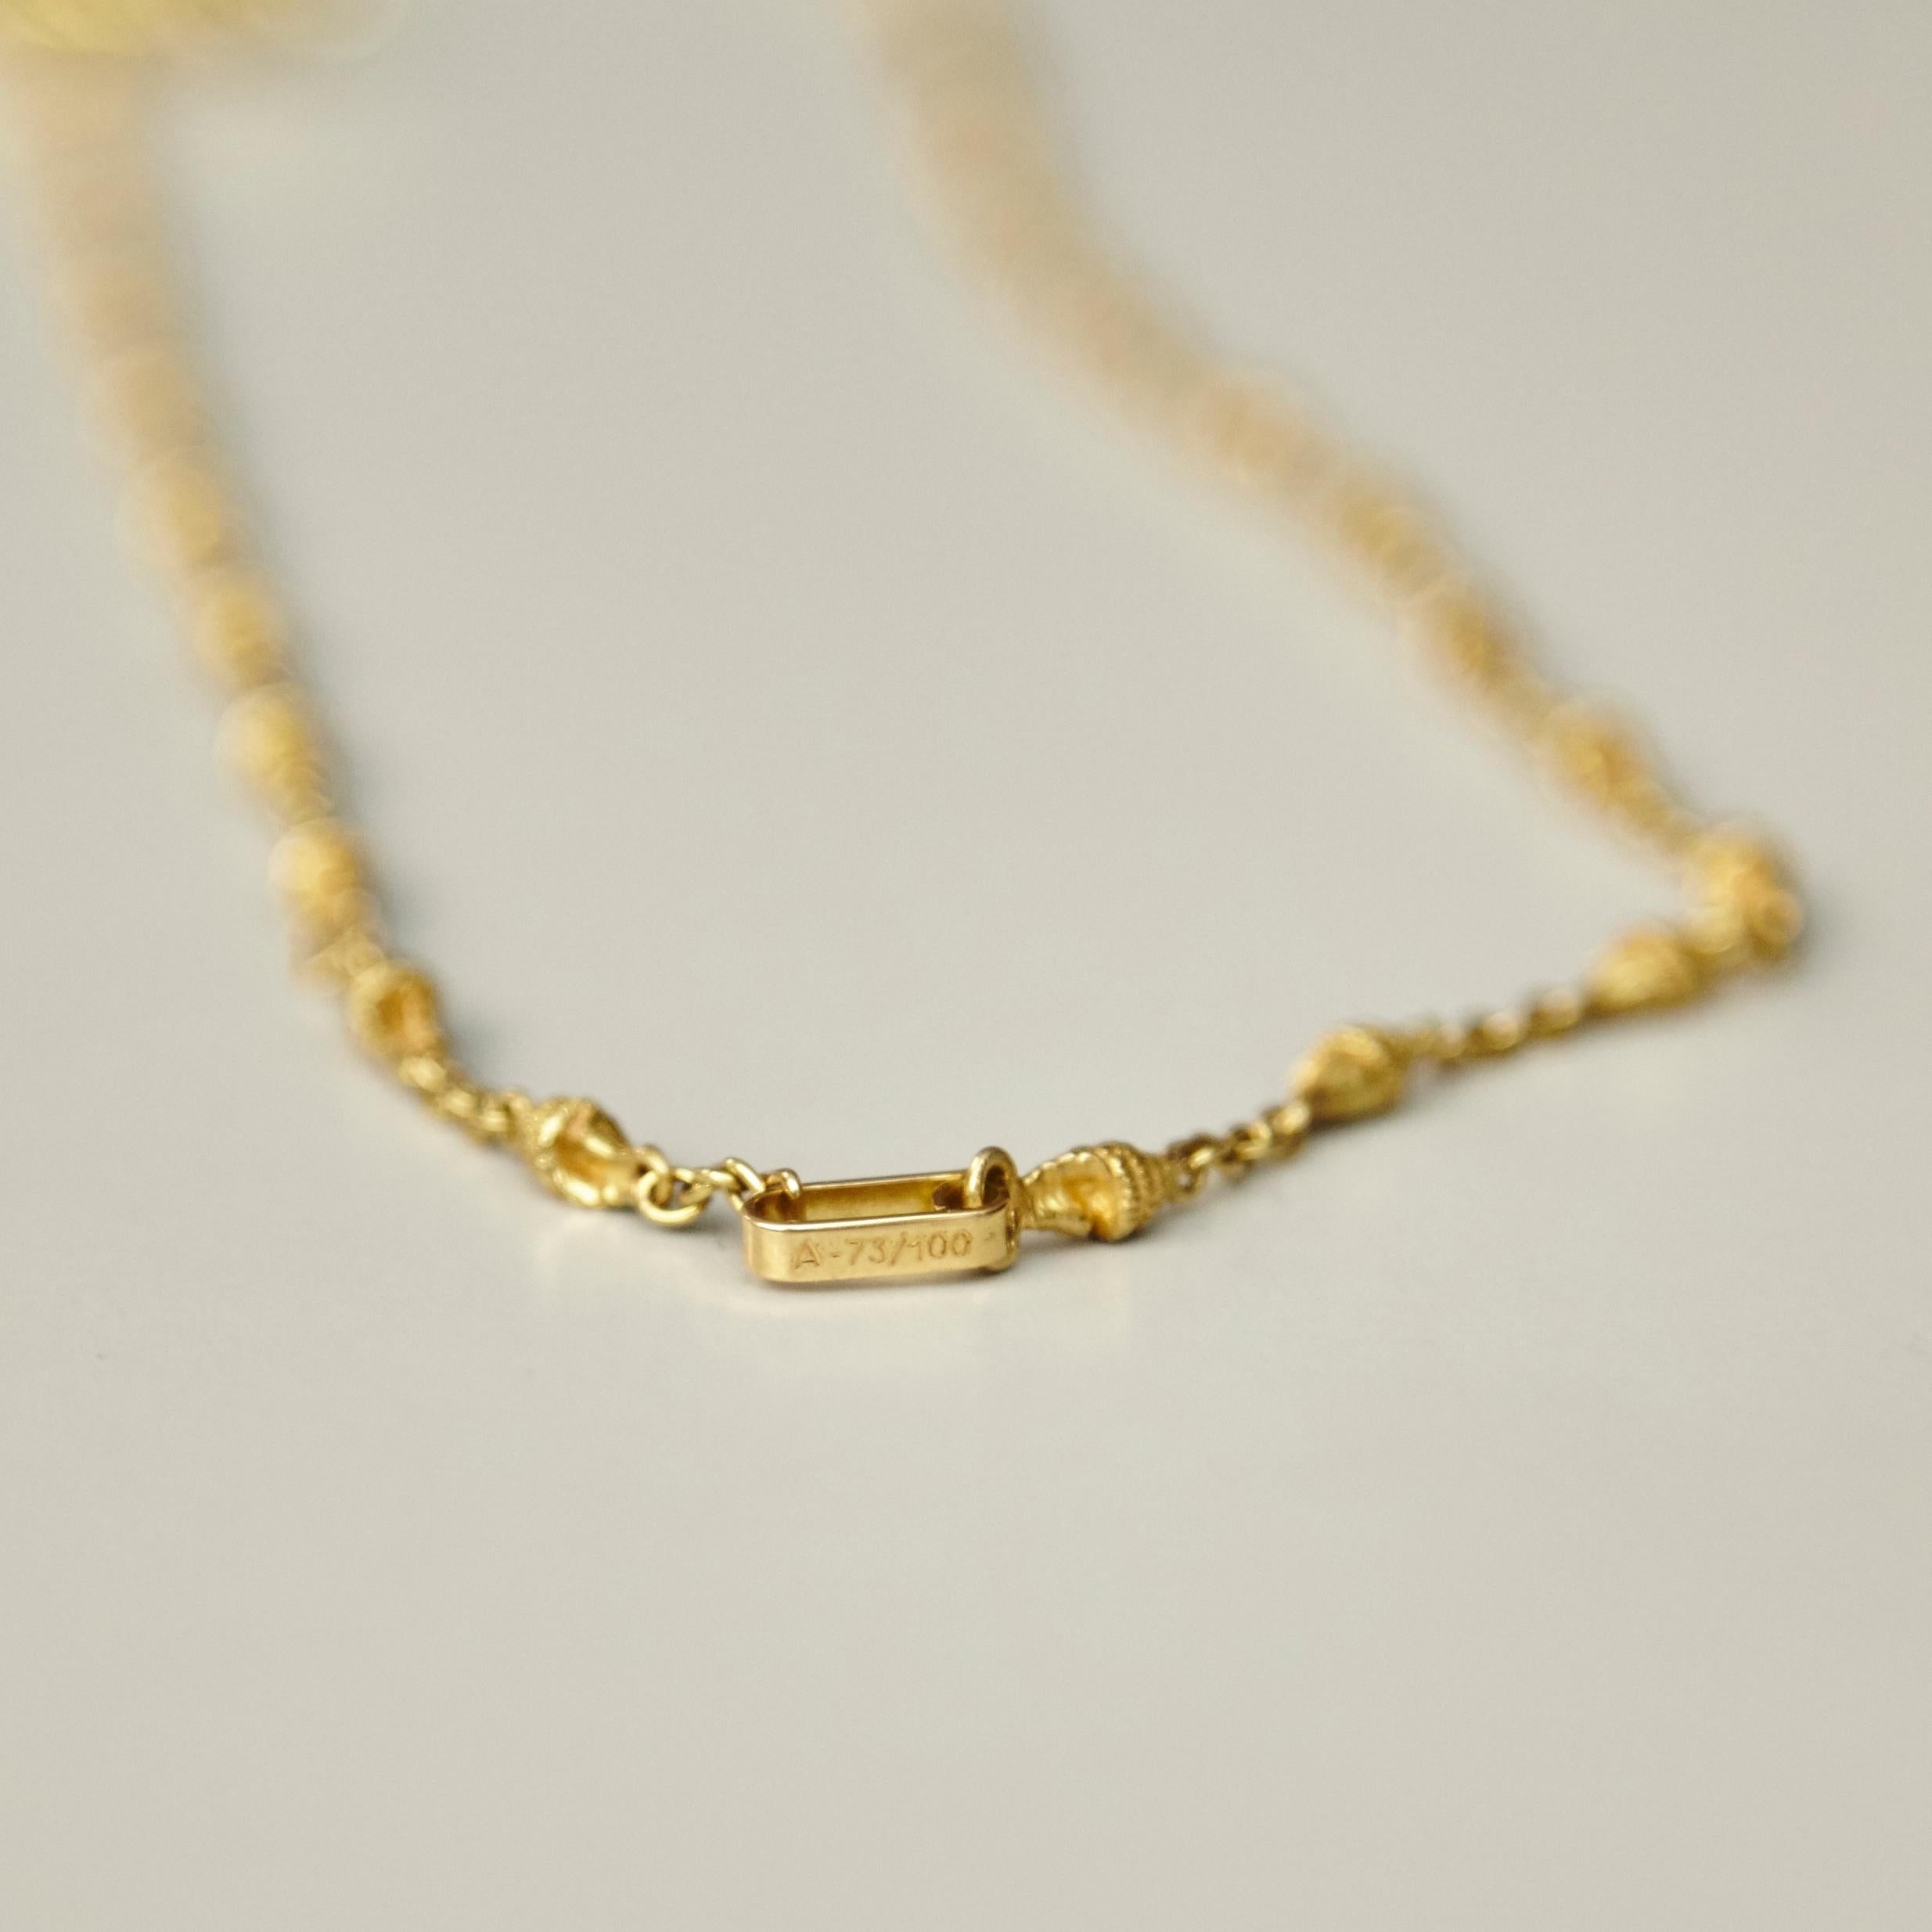 Limited Edition Dalí Gold Necklace and Bracelet 'The Man and the Dolphin' 3